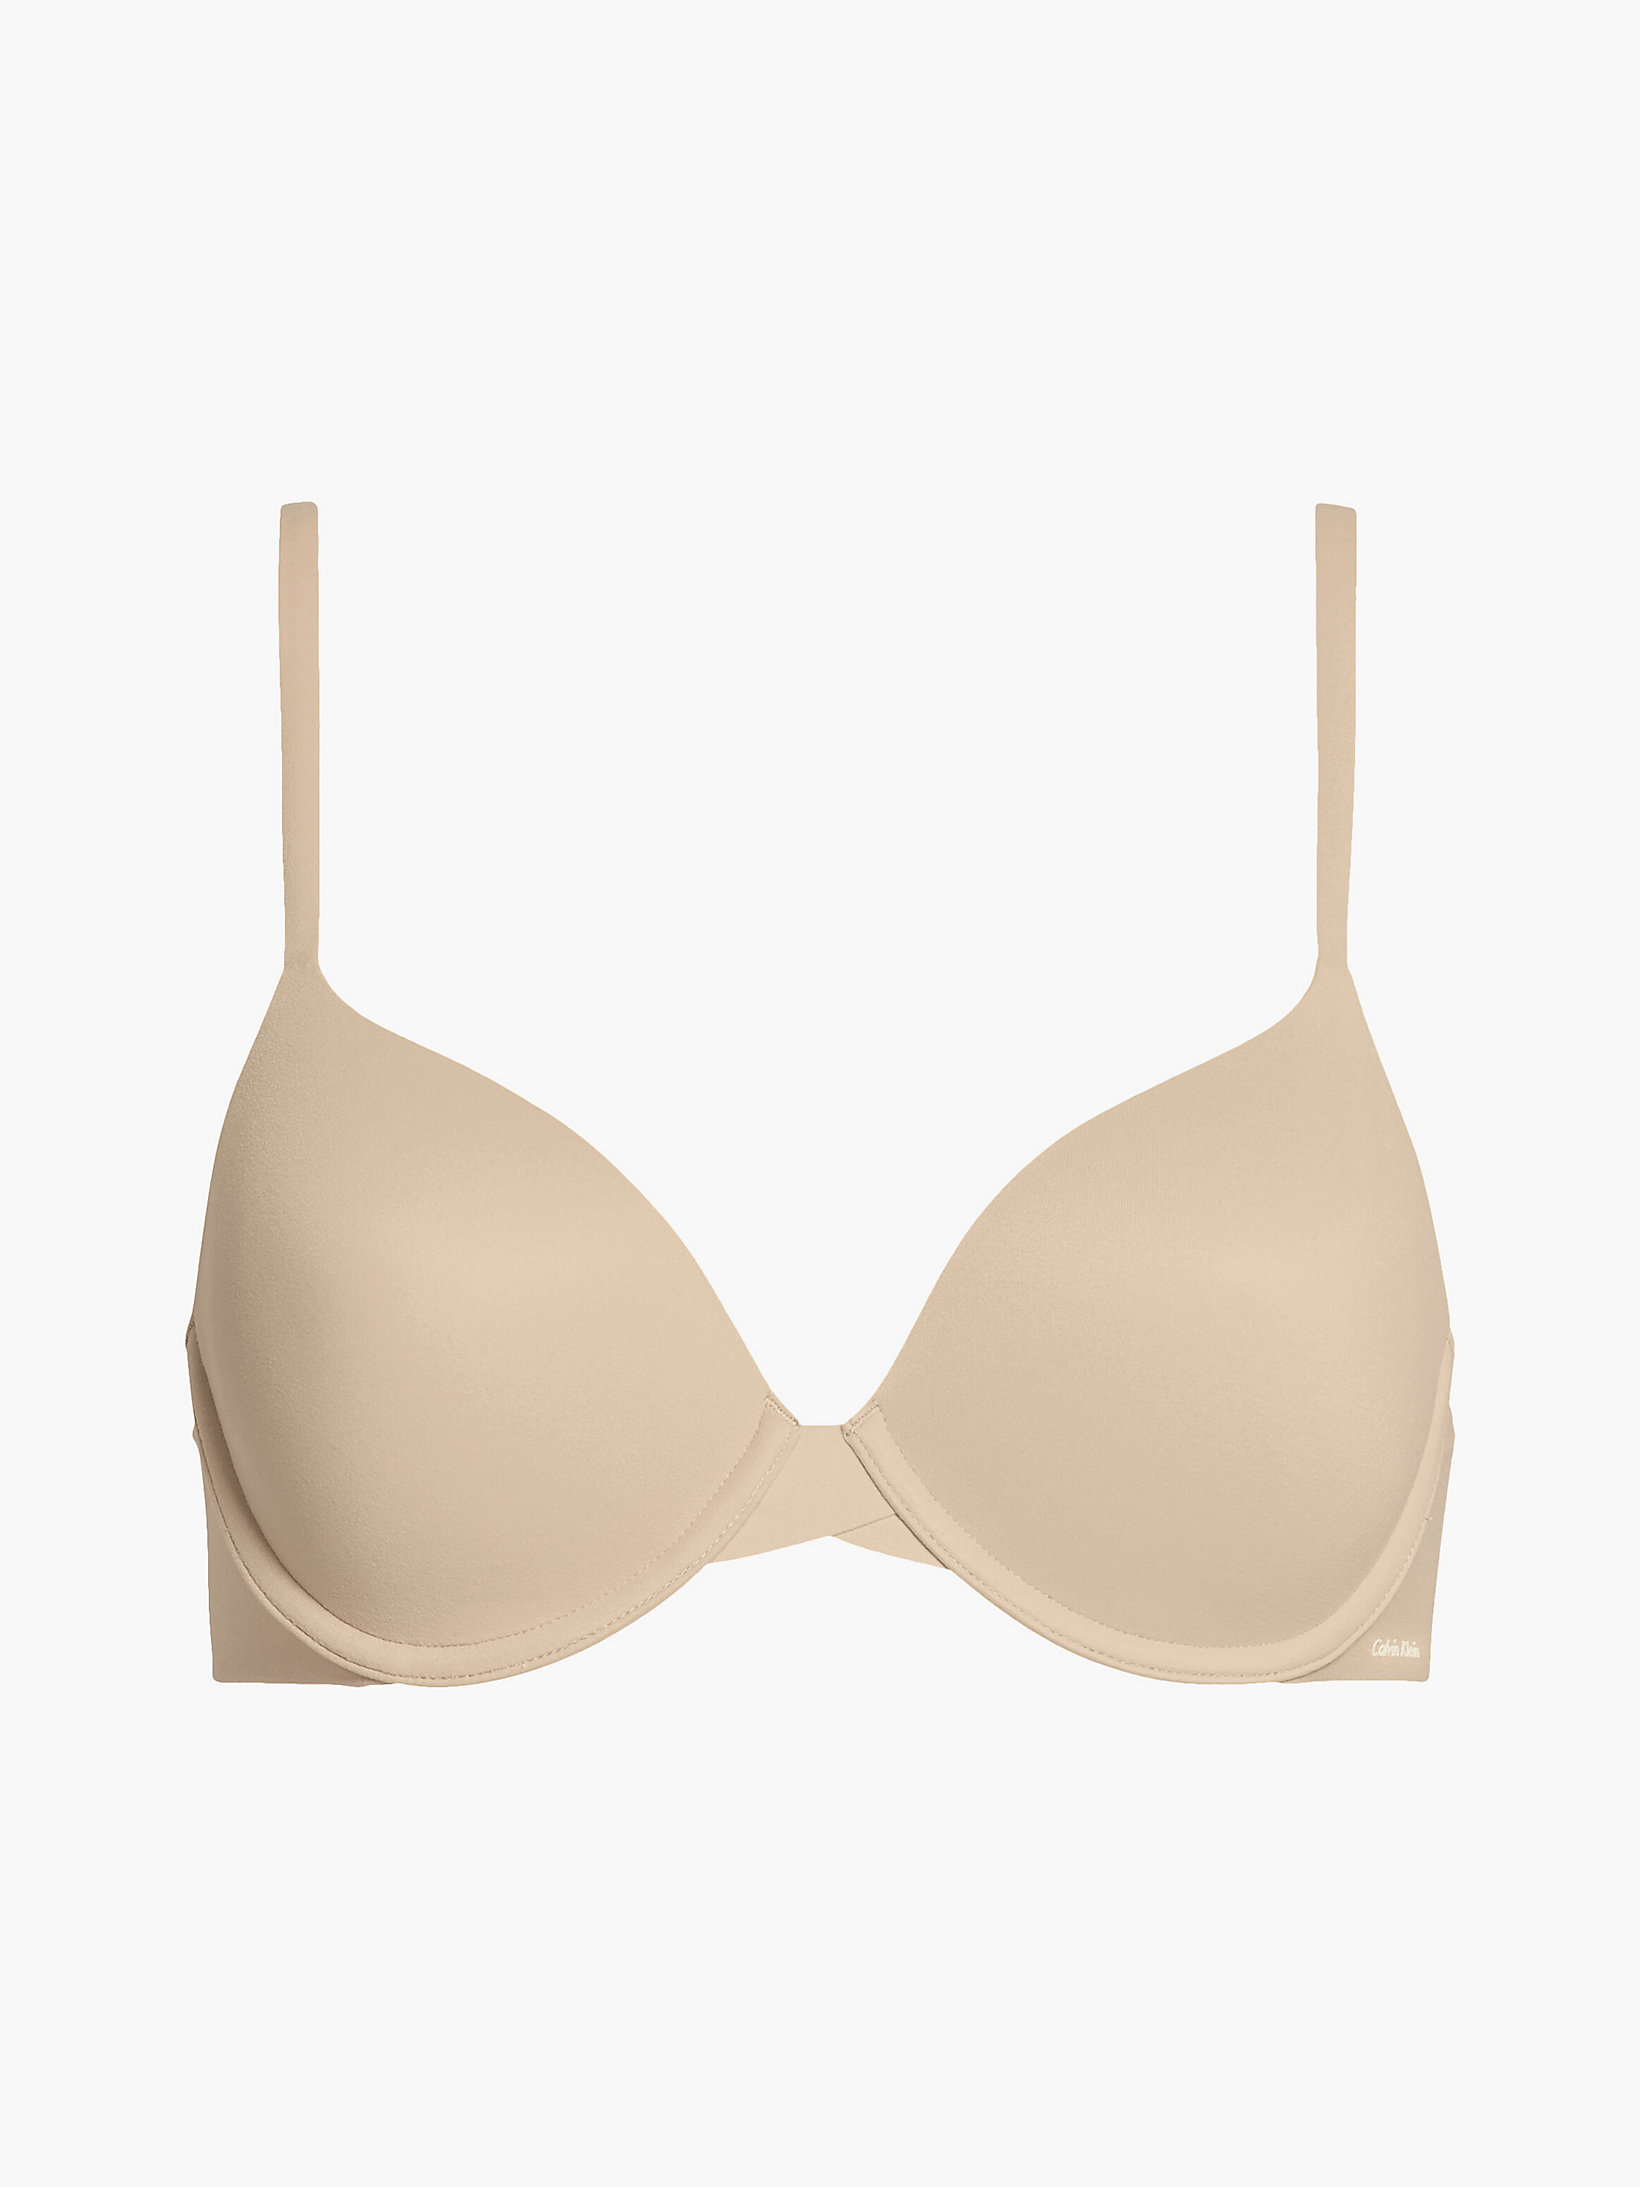 Bra pictures images